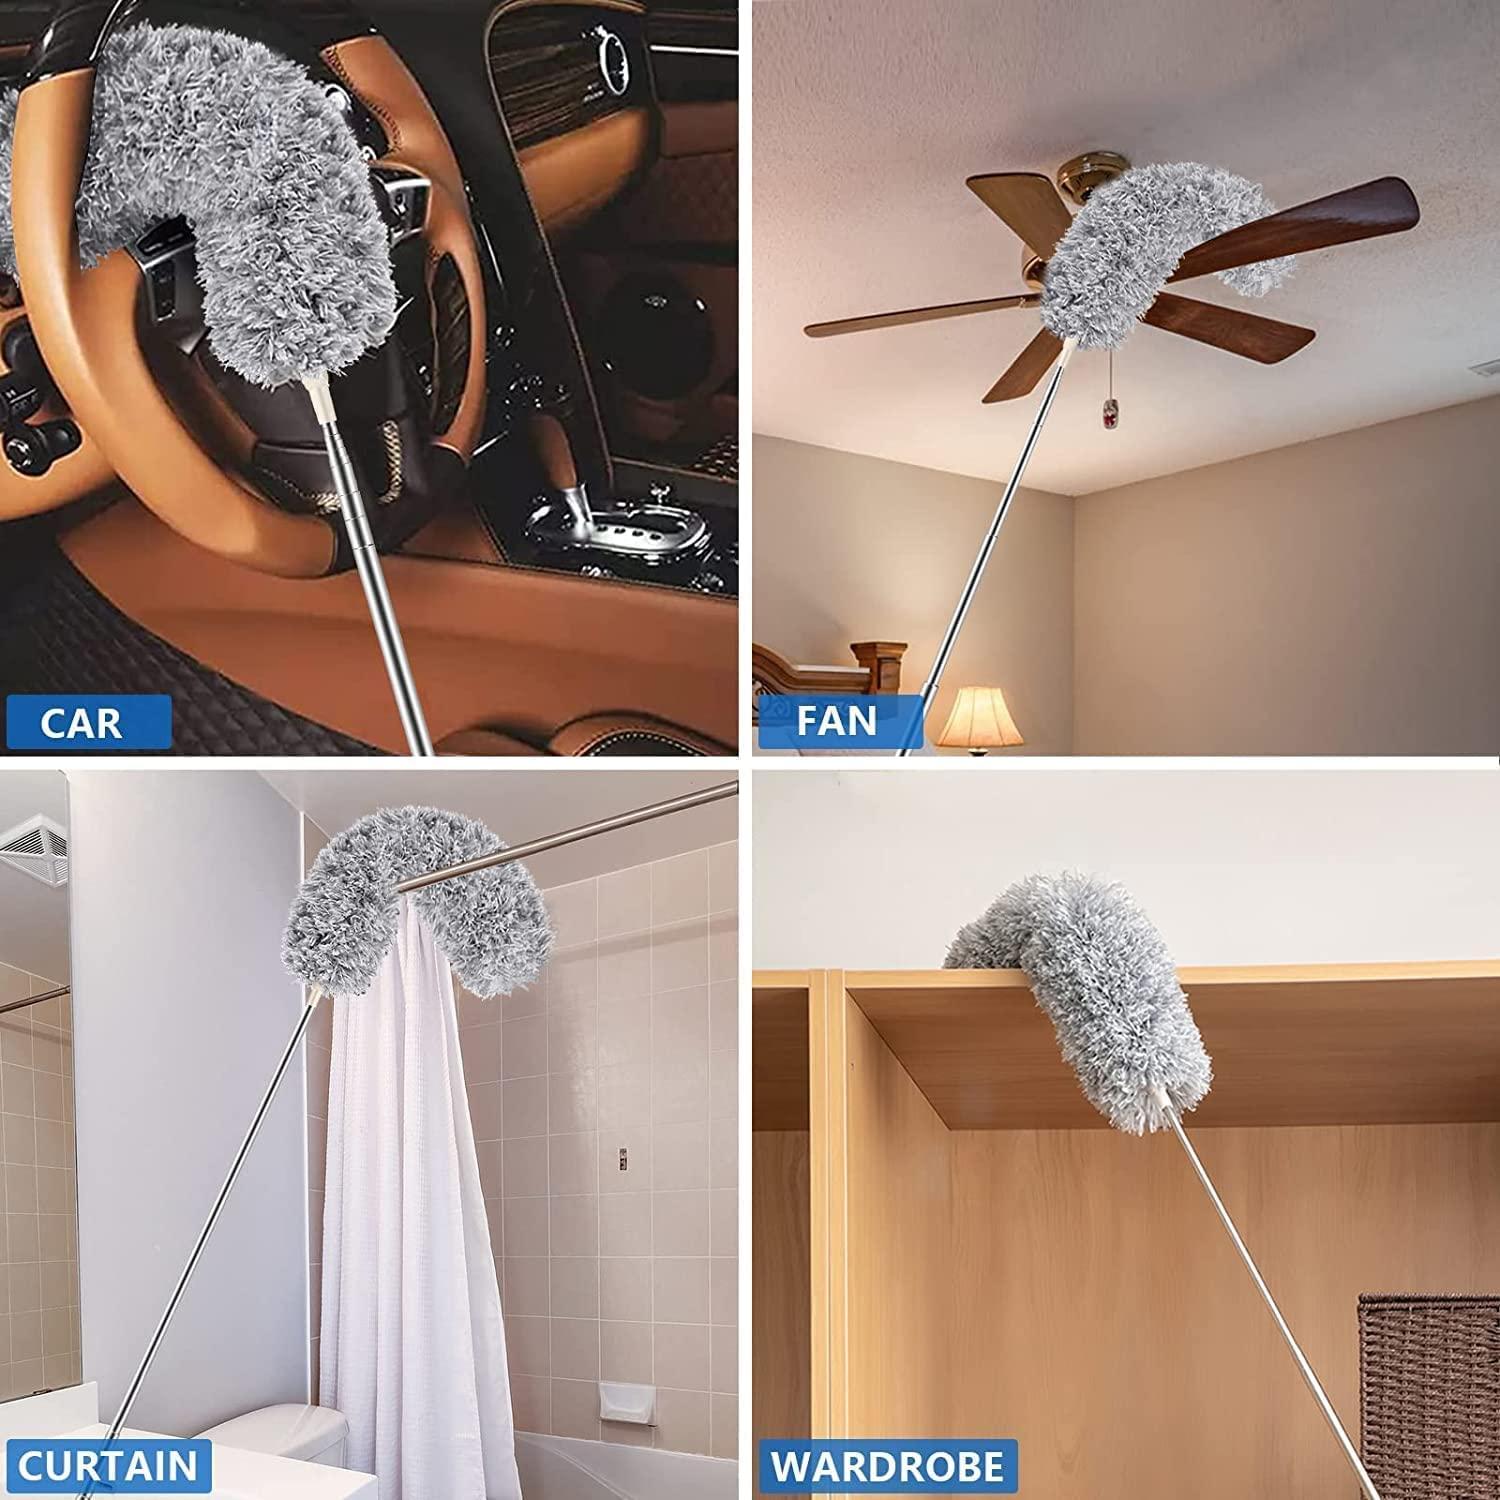 Dusters for Cleaning High Ceiling Fan, Microfiber Duster with Extension Pole 30-100 Inches, FUUNSOO Retractable Gap Dust Brush Cleaner Long Feather D